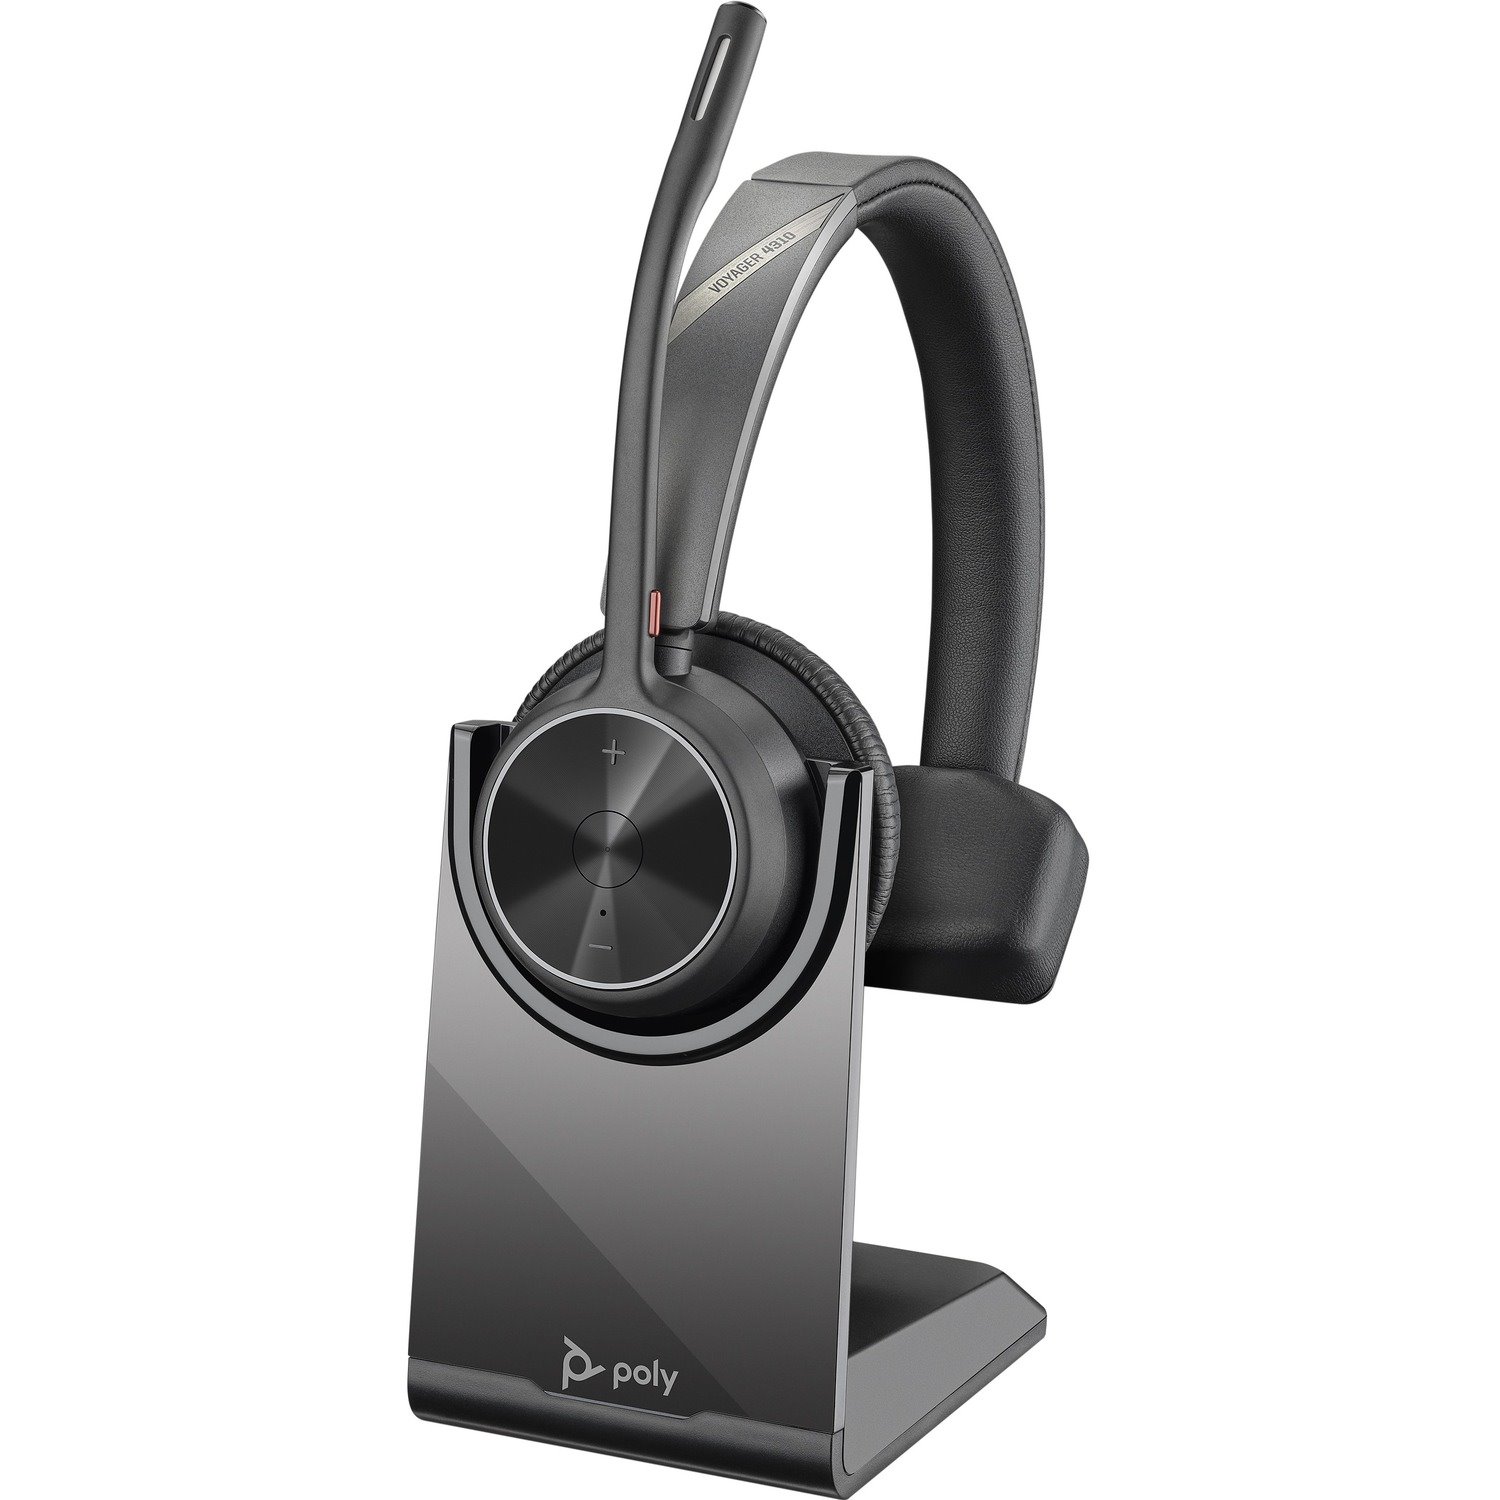 Poly Voyager 4300 UC 4310-M Wired/Wireless Over-the-head Mono Headset